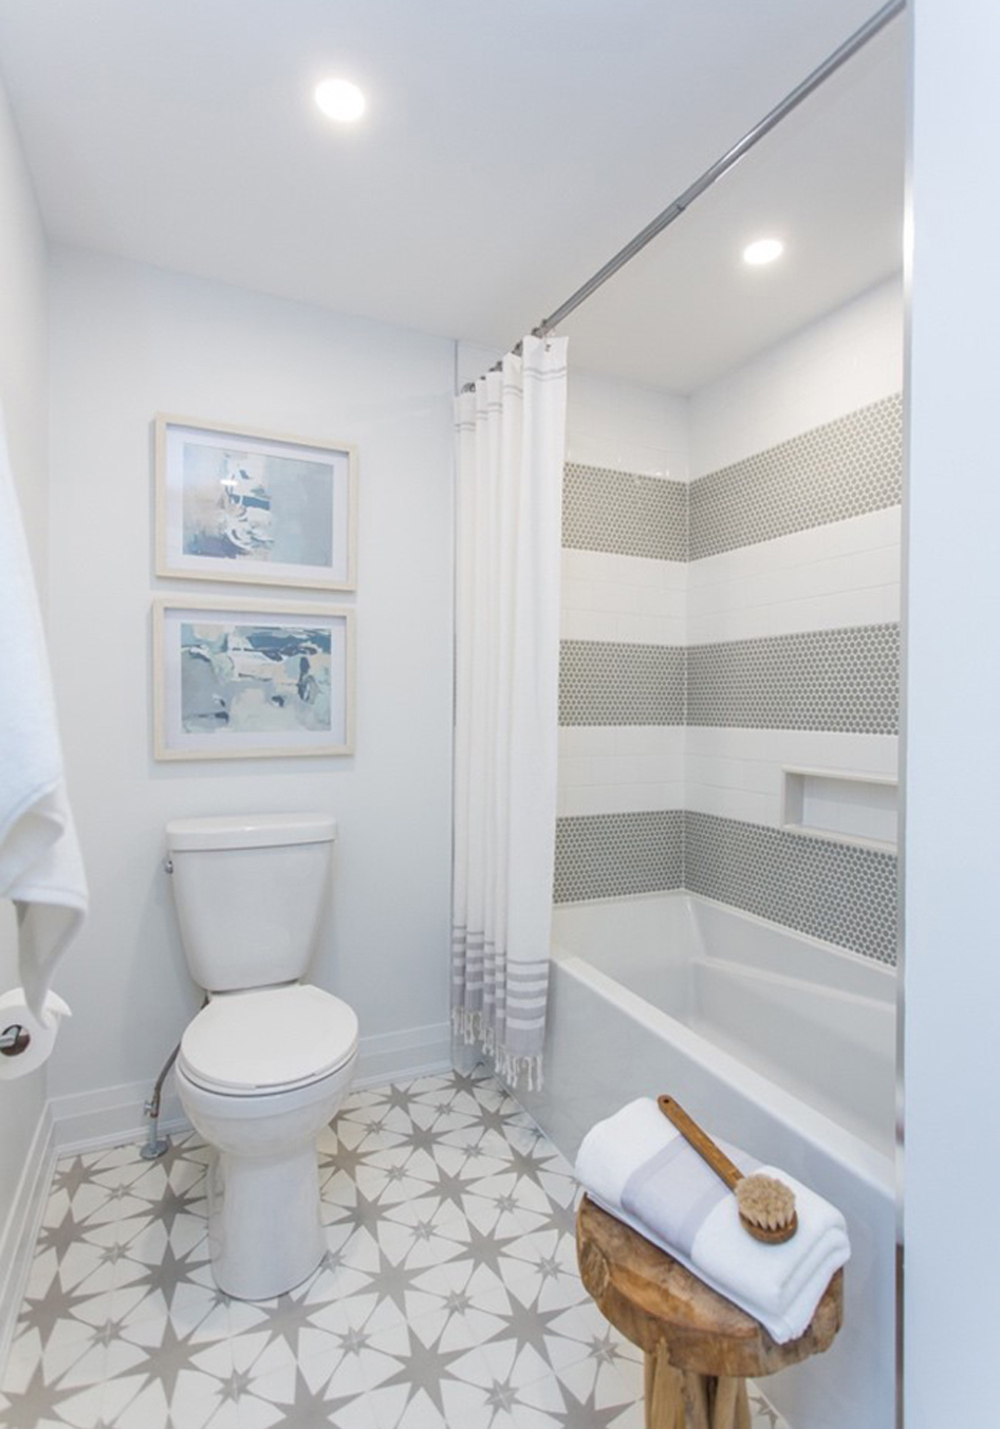 A small bathroom renovation featuring starburst floor patterns and striped shower tiles